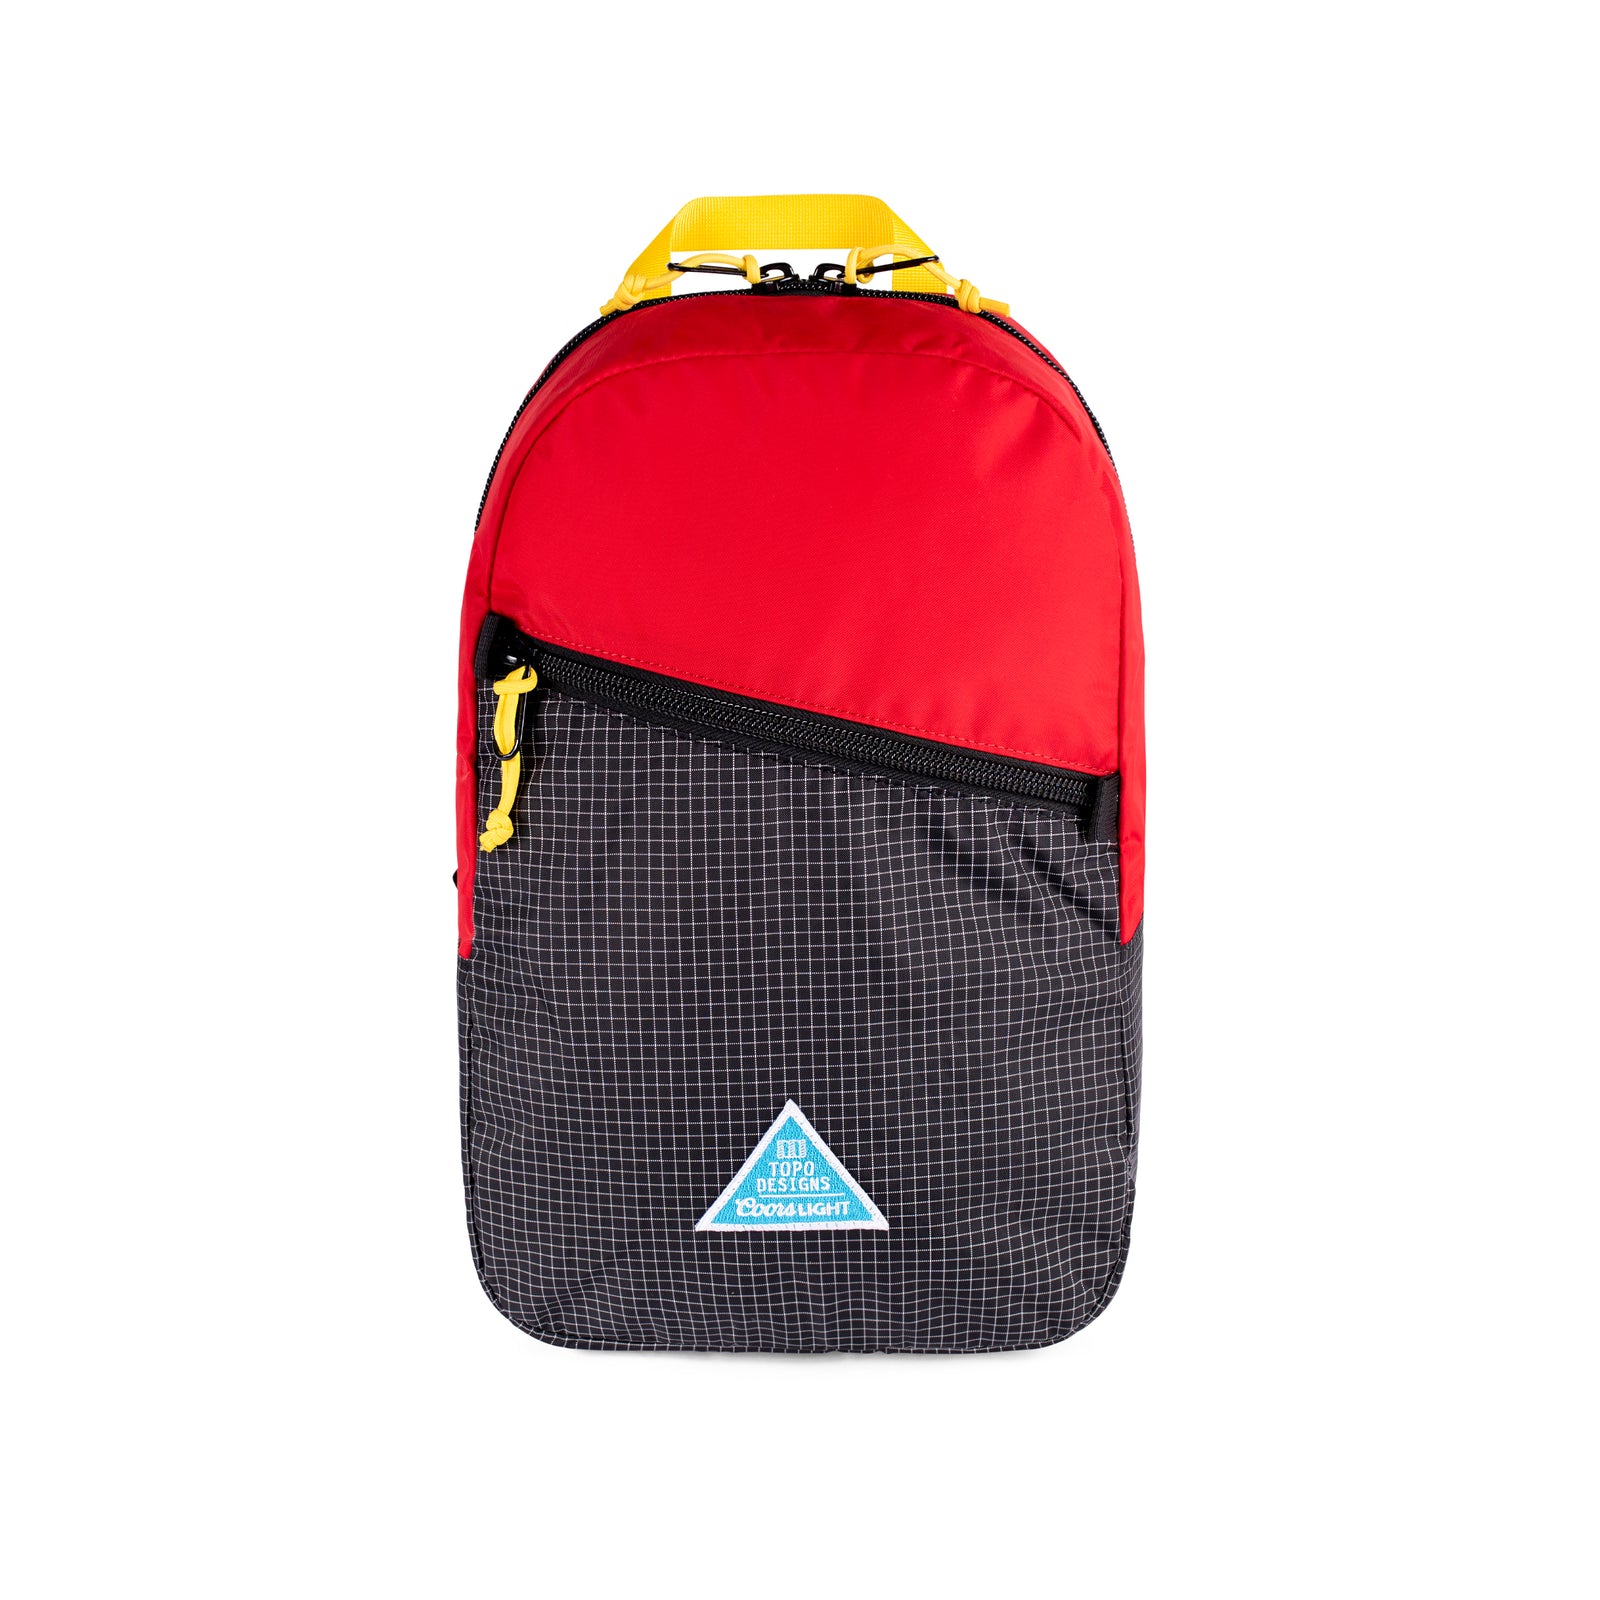 Front view of Topo Designs x Coors Light Light Pack backpack in red/black ripstop